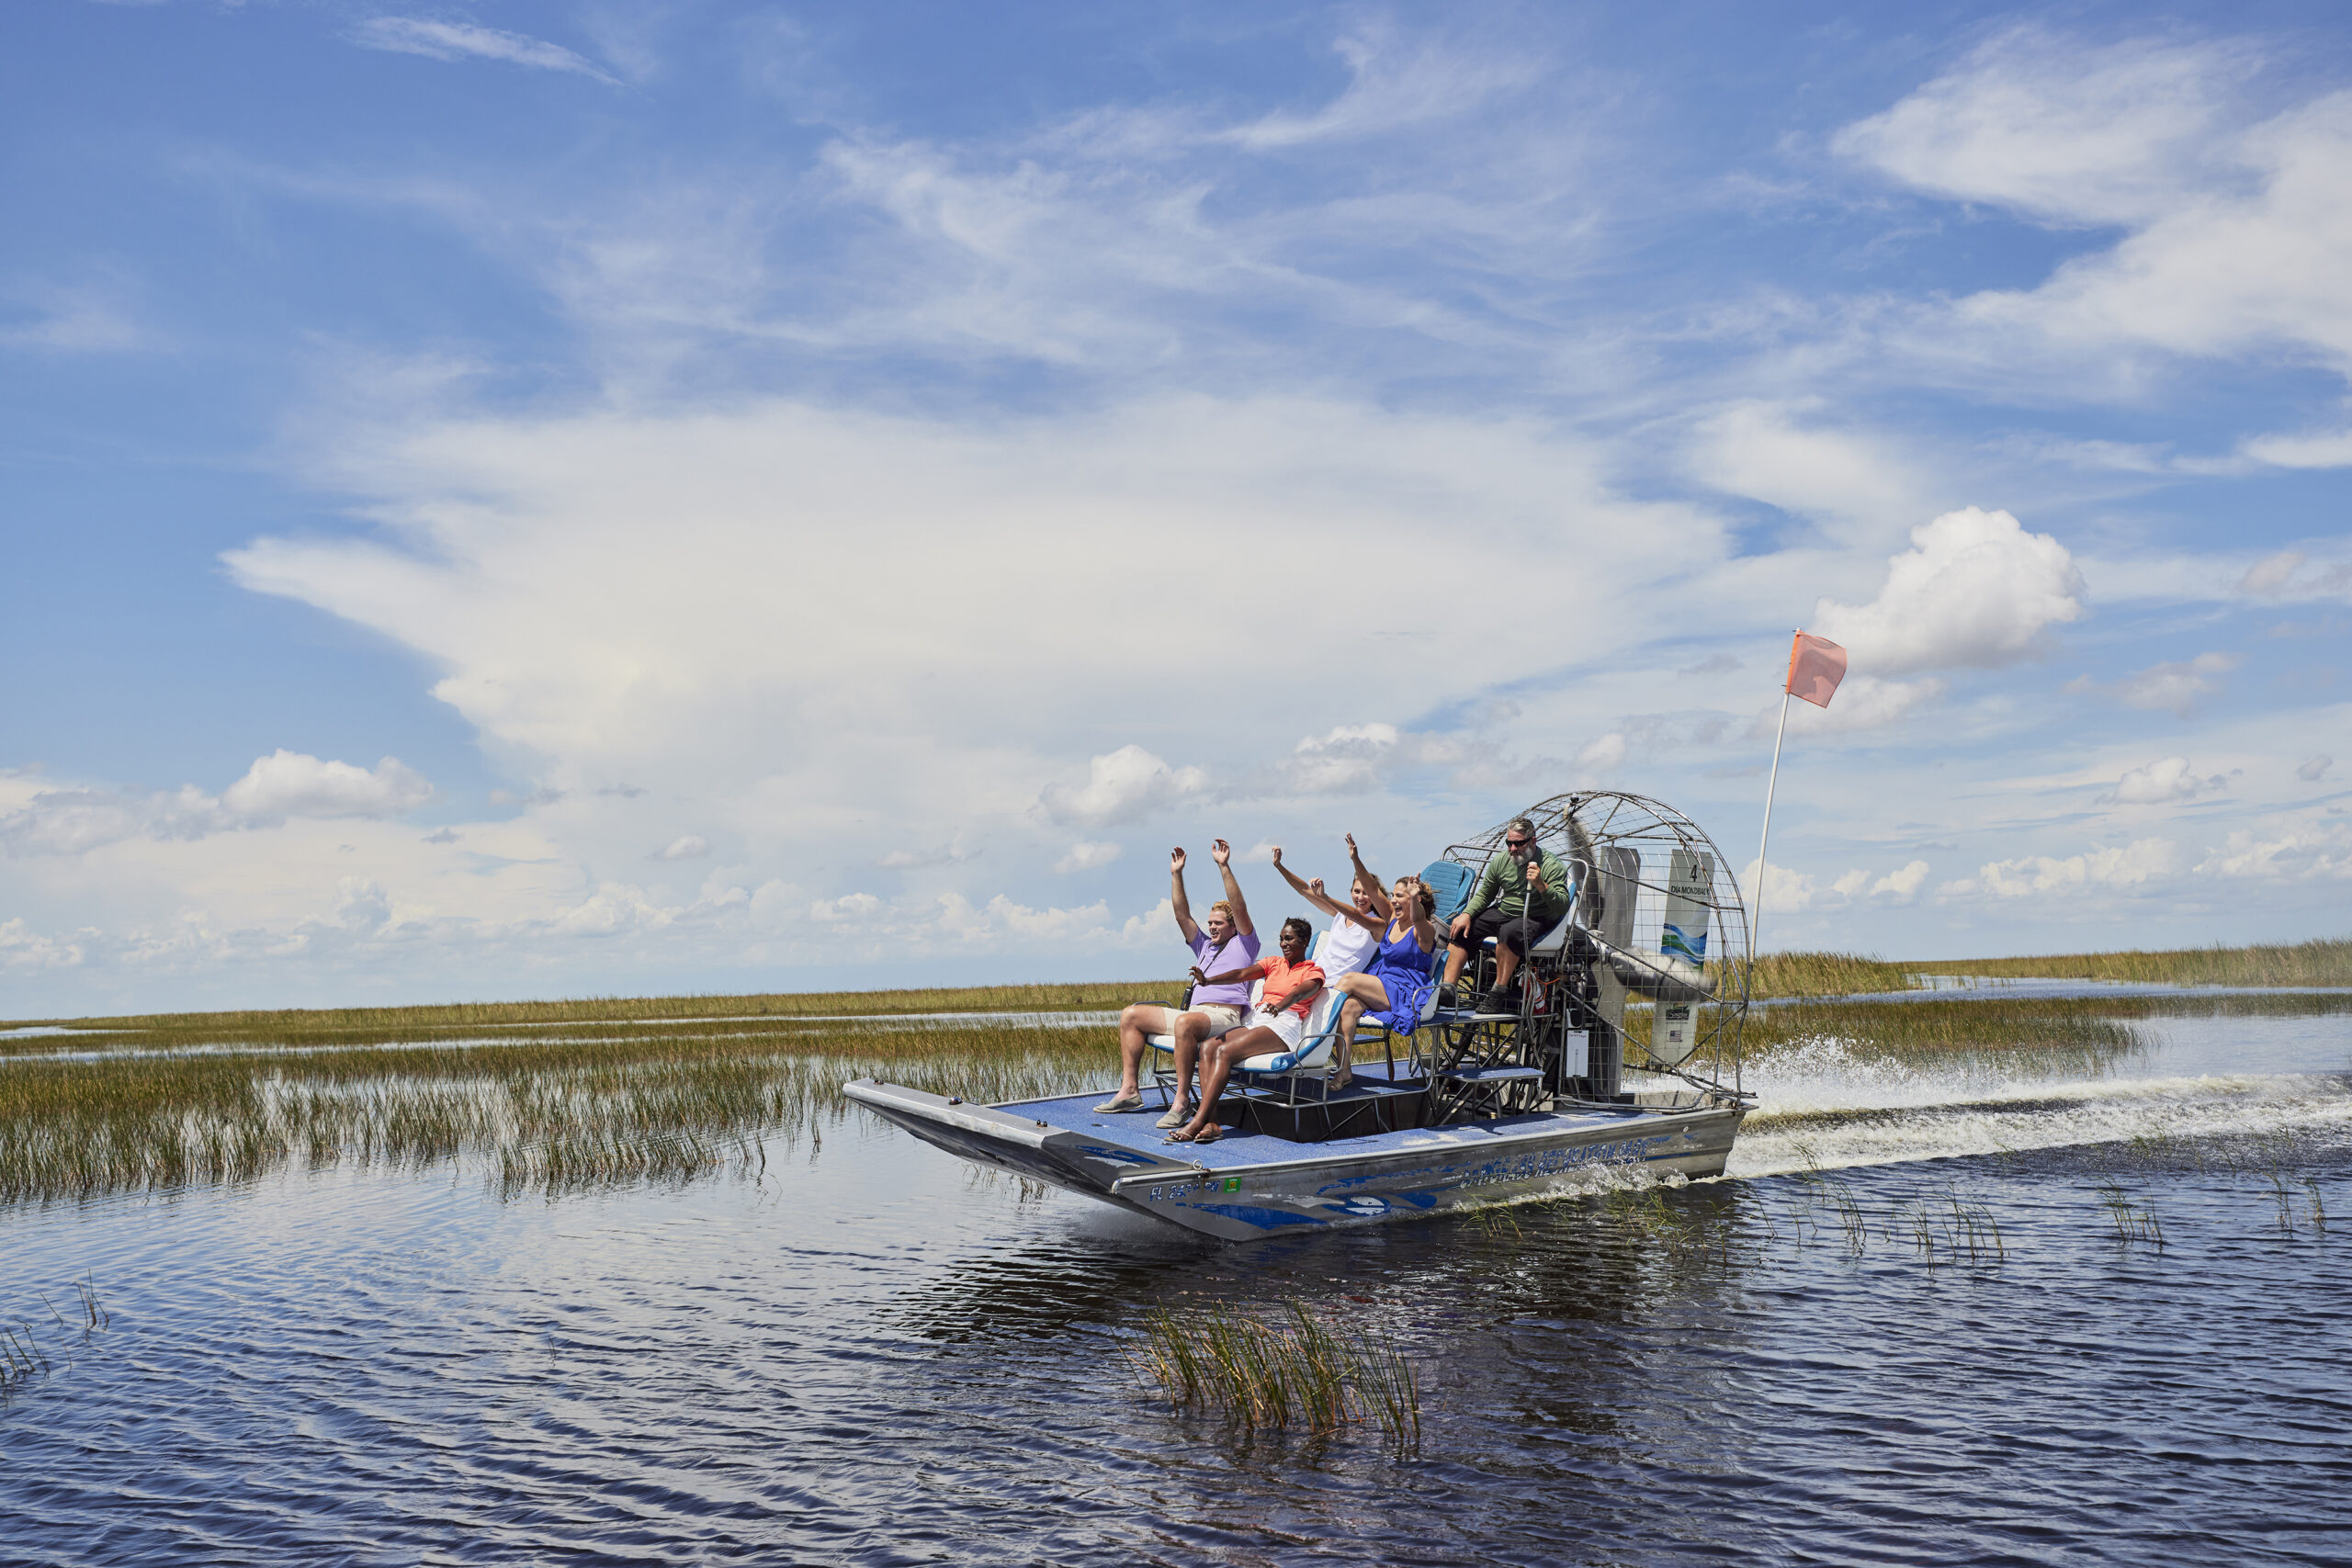 Group on an Airboat (Photo Credit: Visit Fort Lauderdale)